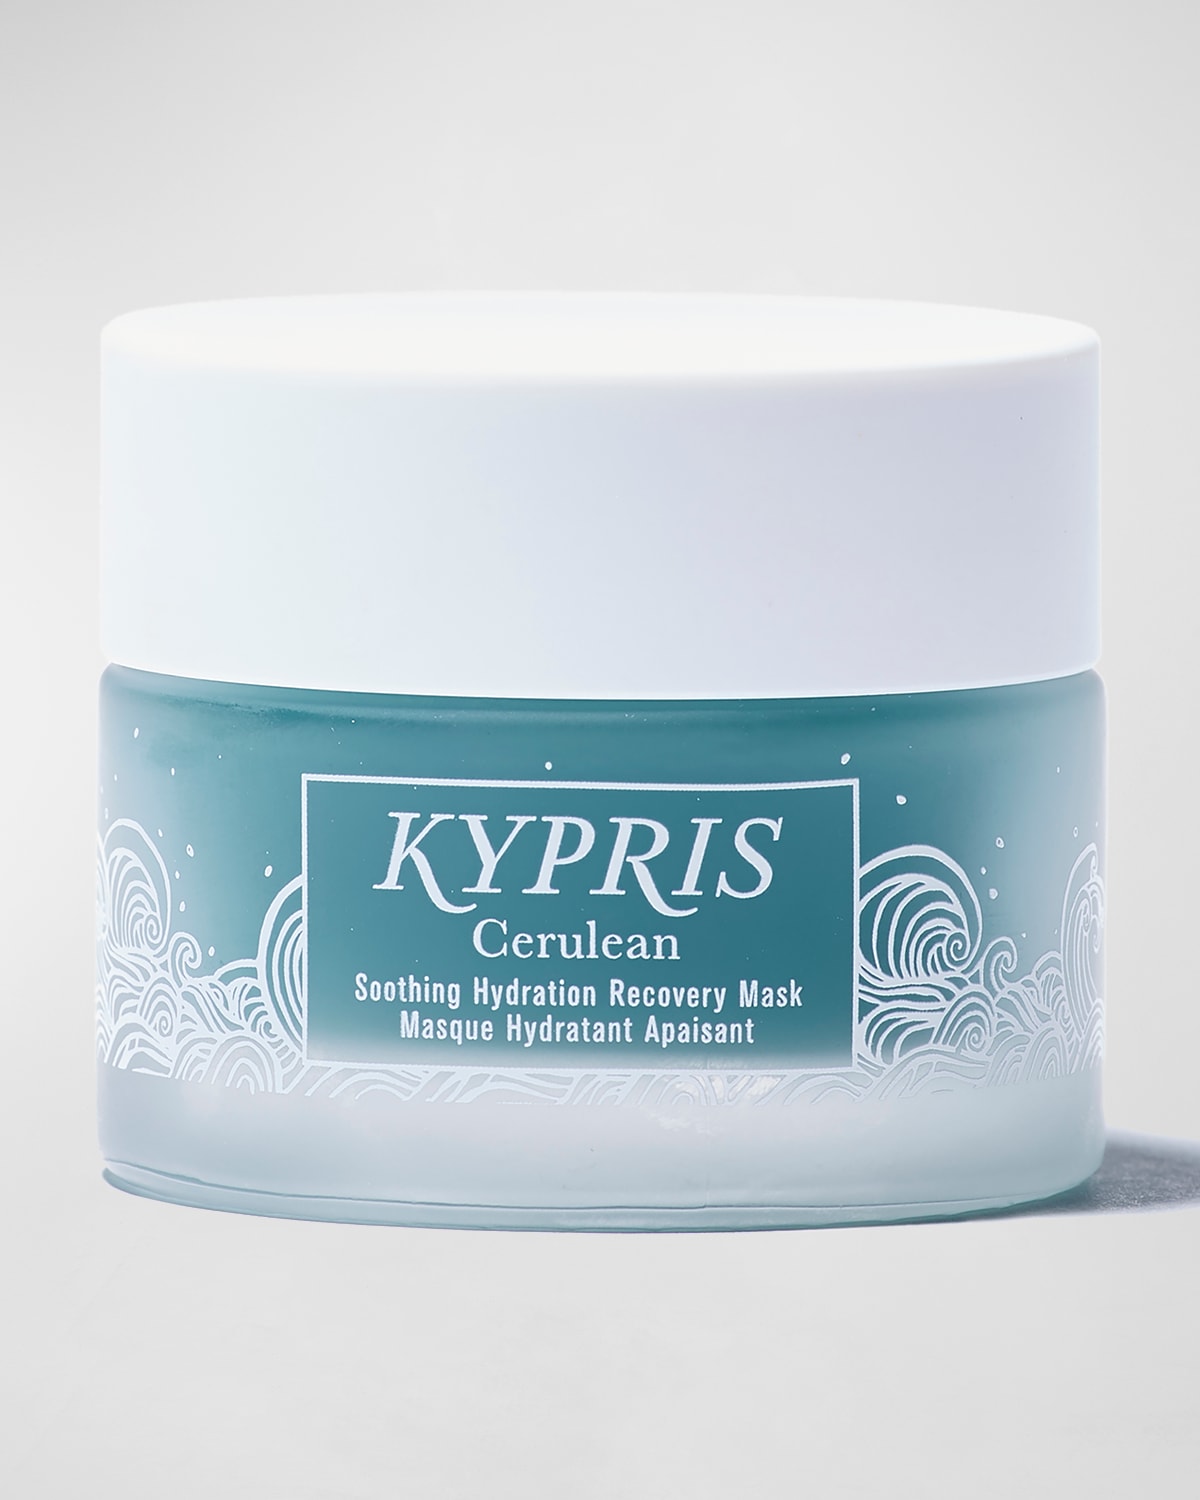 KYPRIS Cerulean Soothing Hydration Recovery Mask, 1.6 oz.